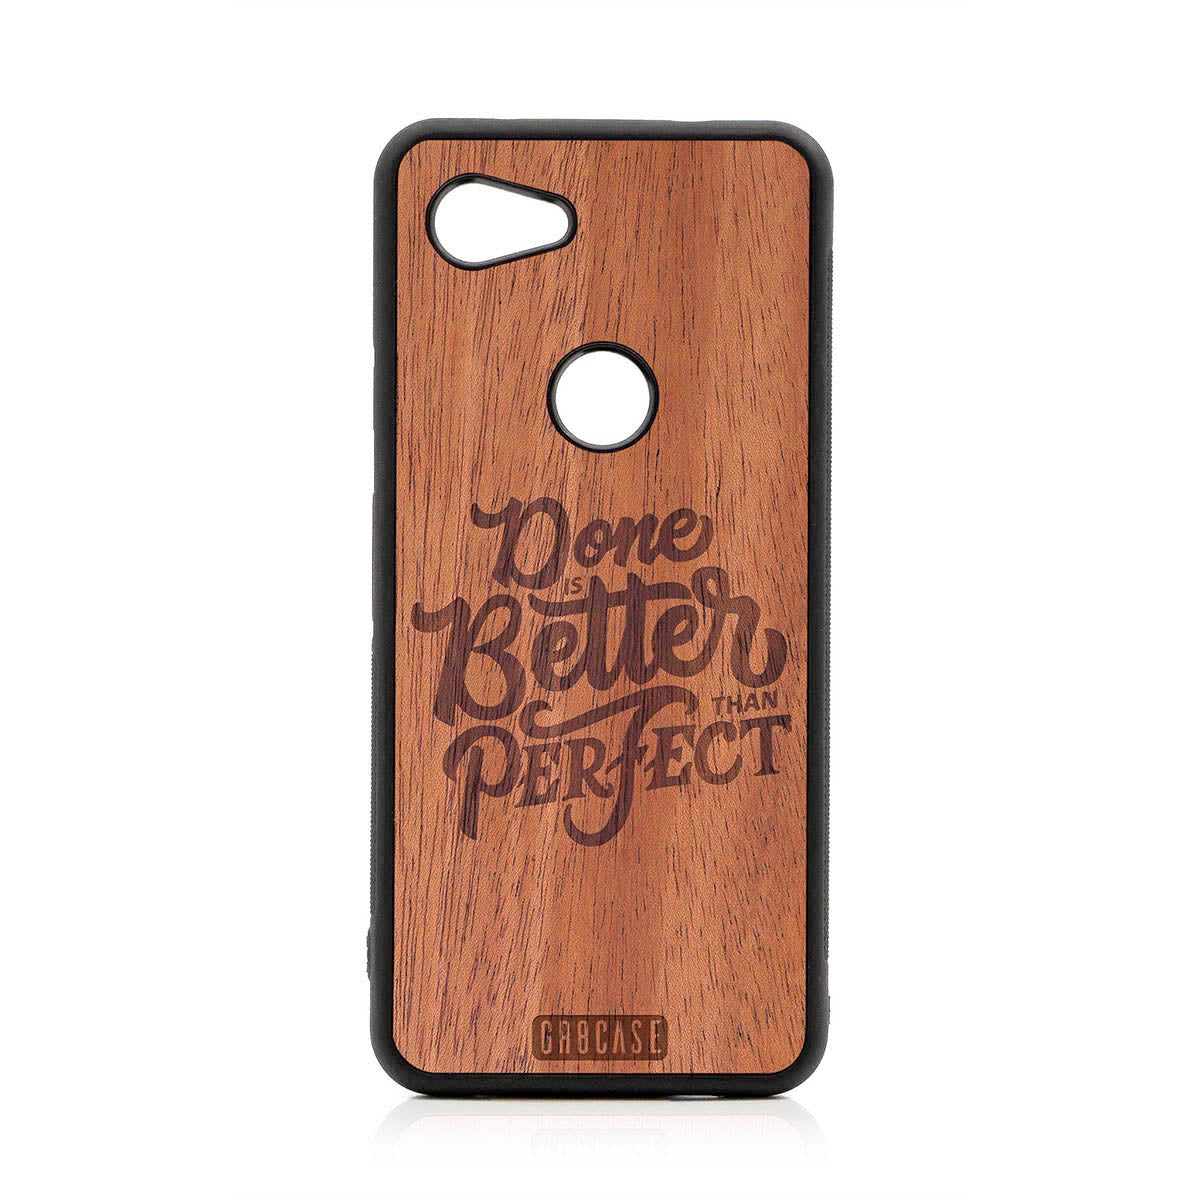 Done Is Better Than Perfect Design Wood Case For Google Pixel 3A XL by GR8CASE